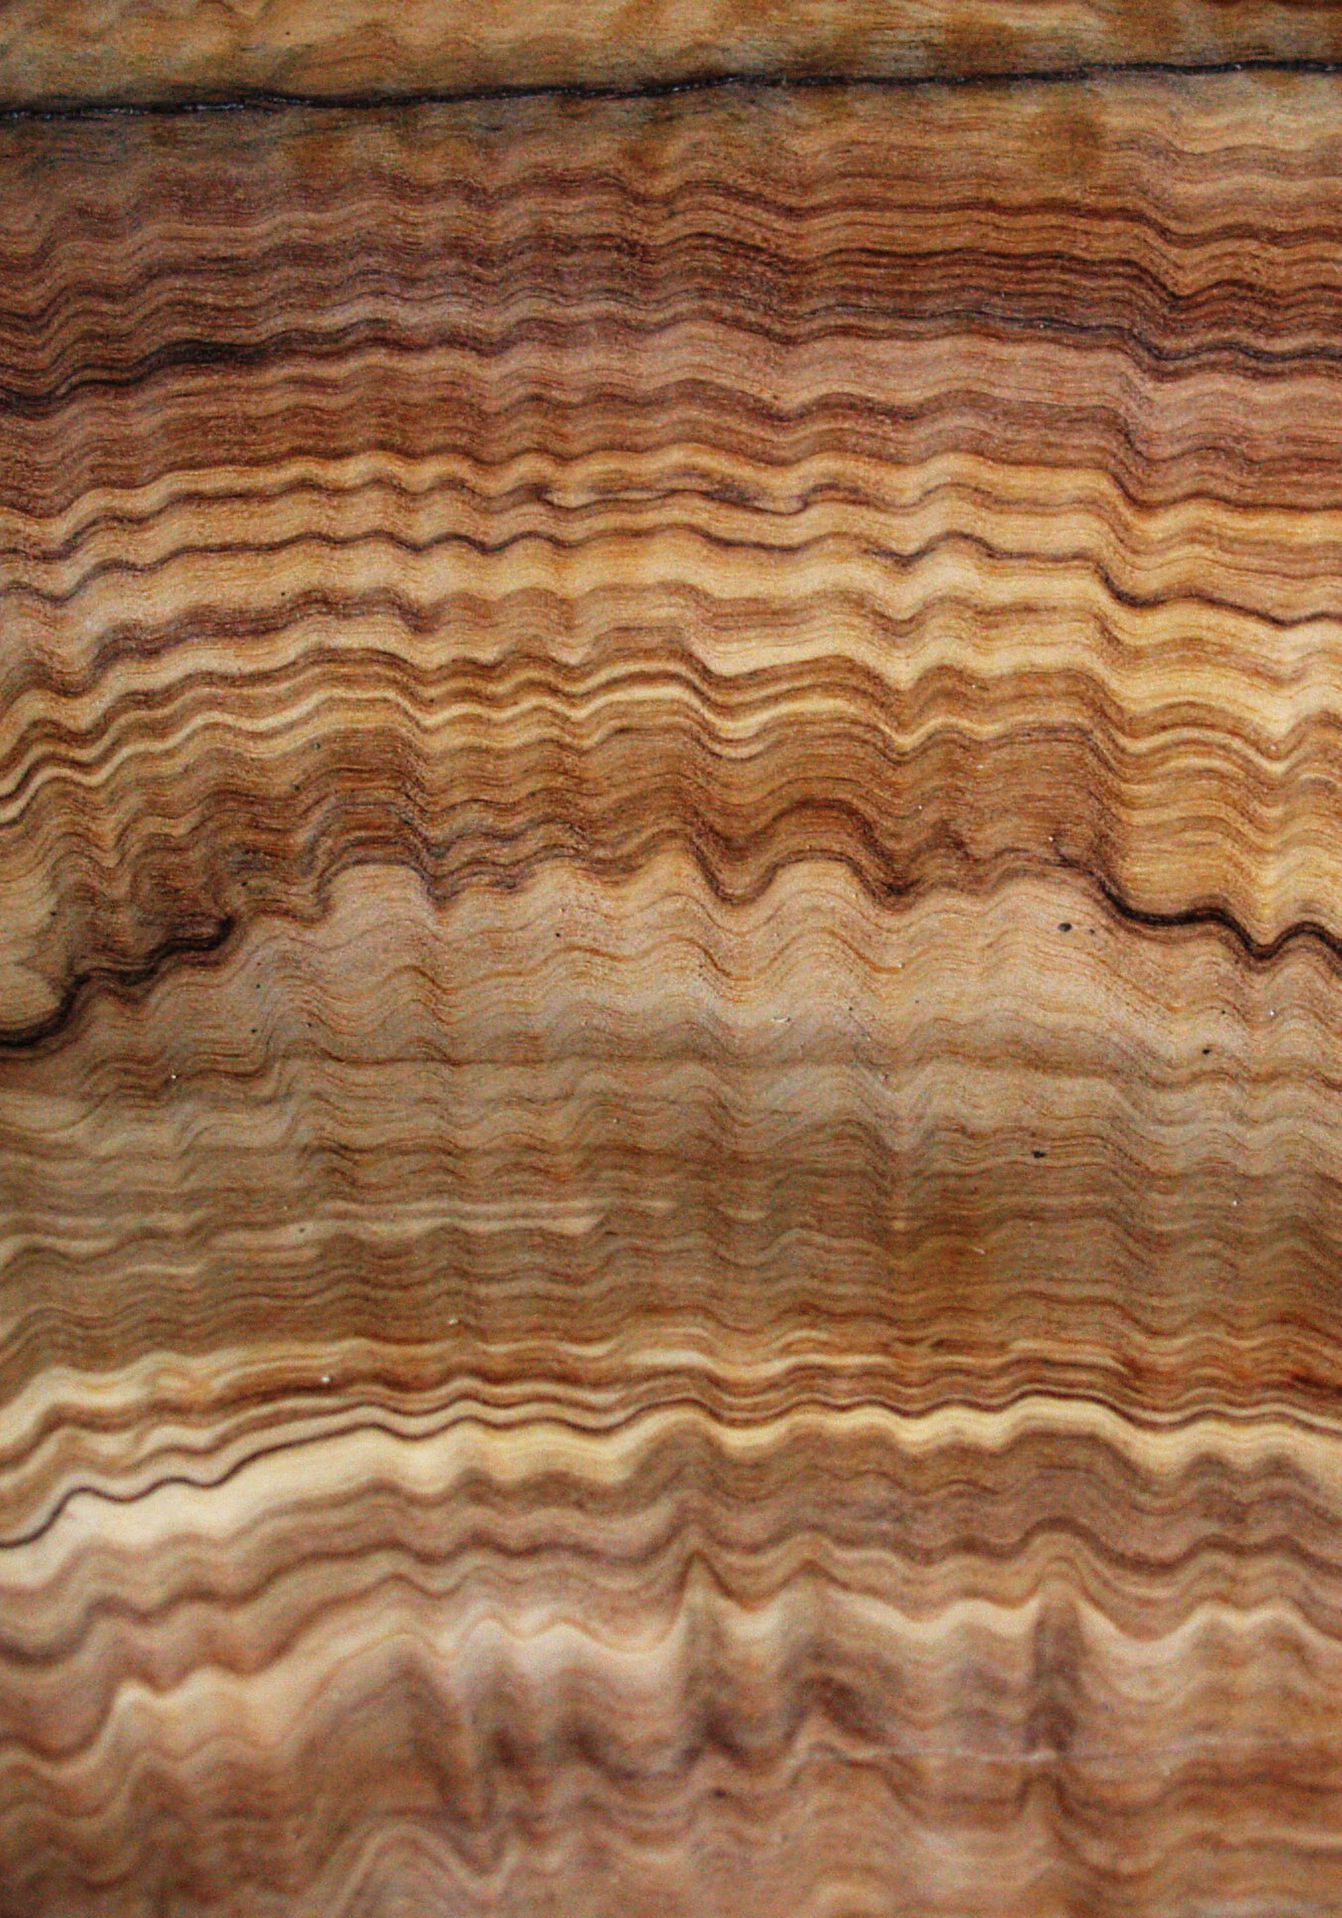 Olive wood. The most commonly used sort of wood for 